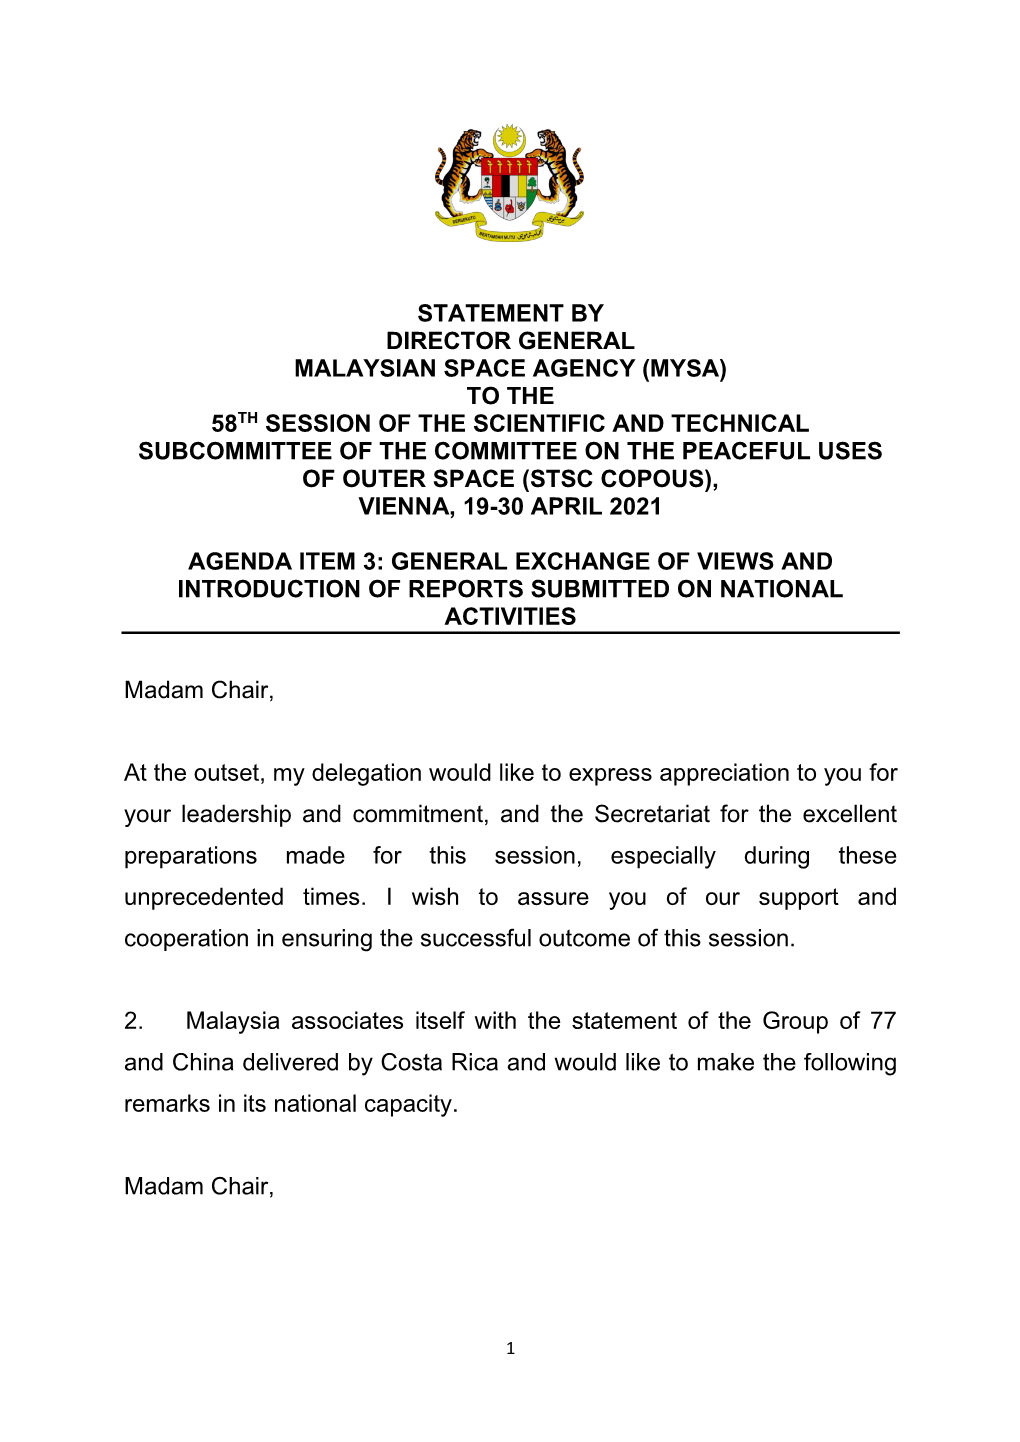 Statement by Director General Malaysian Space Agency (Mysa) to the 58Th Session of the Scientific and Technical Subcommittee Of